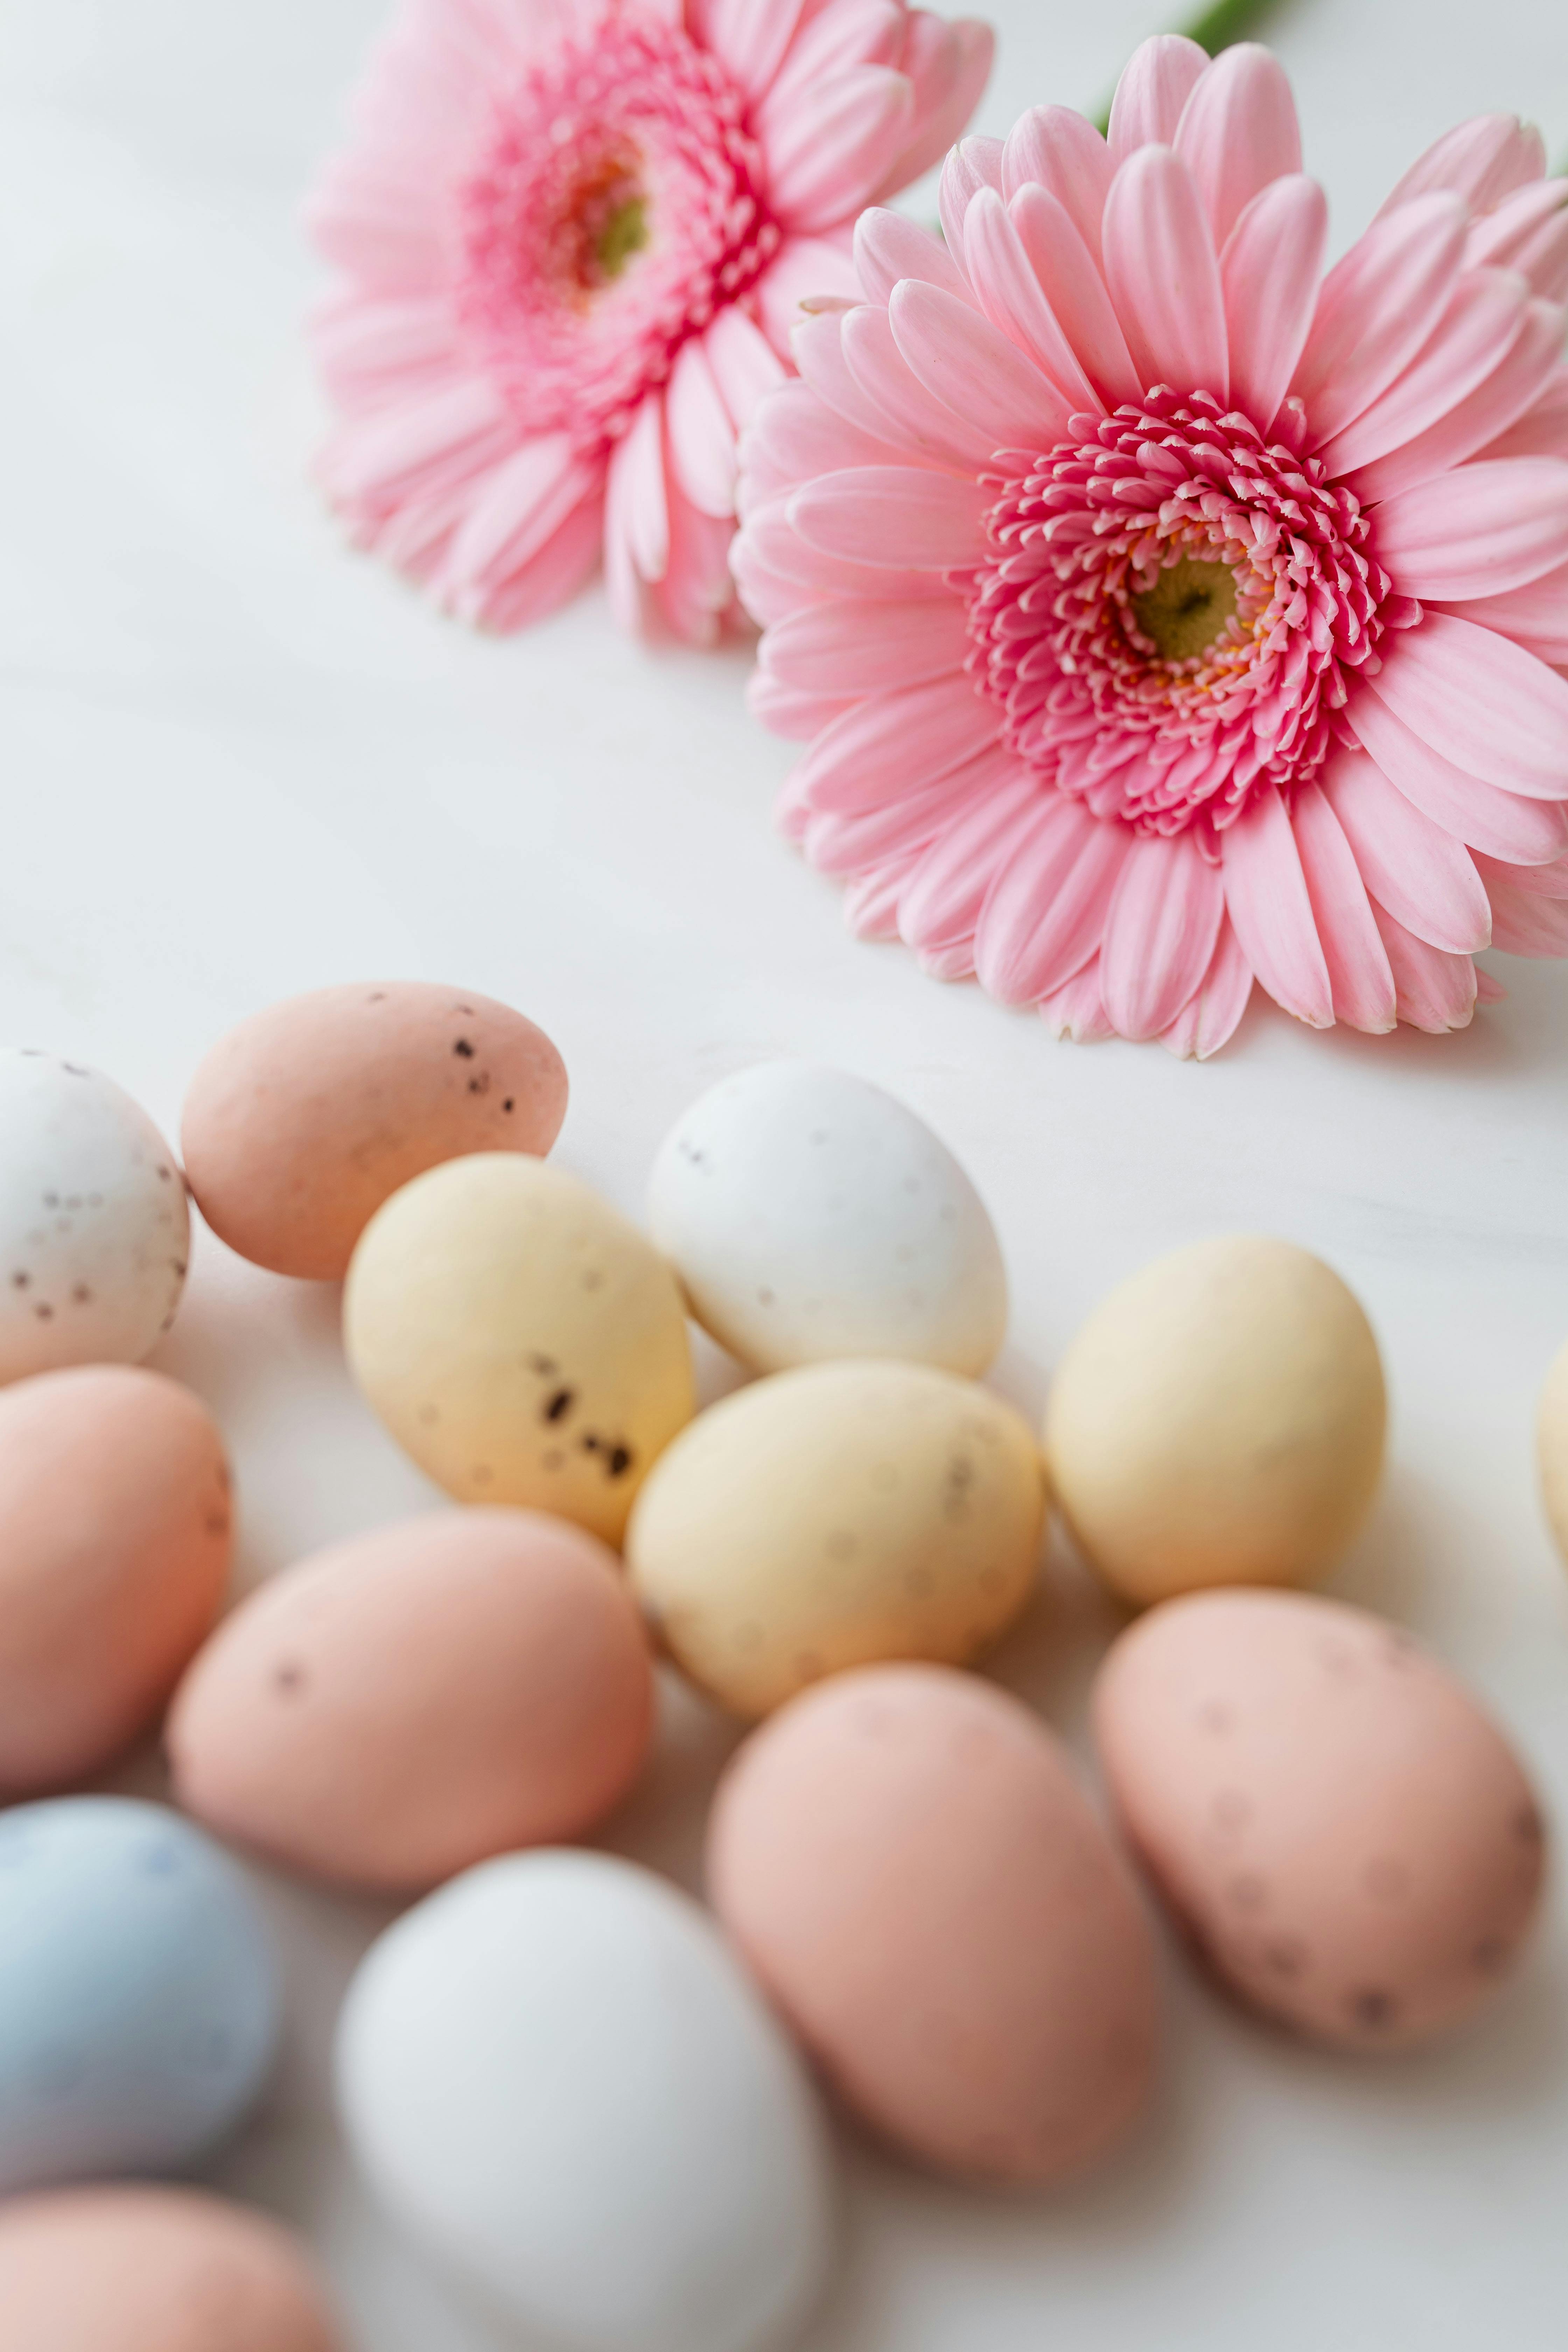 Wallpaper ID 306561  Holiday Easter Phone Wallpaper Egg Easter Egg  Colorful Colors Flower 1440x3120 free download